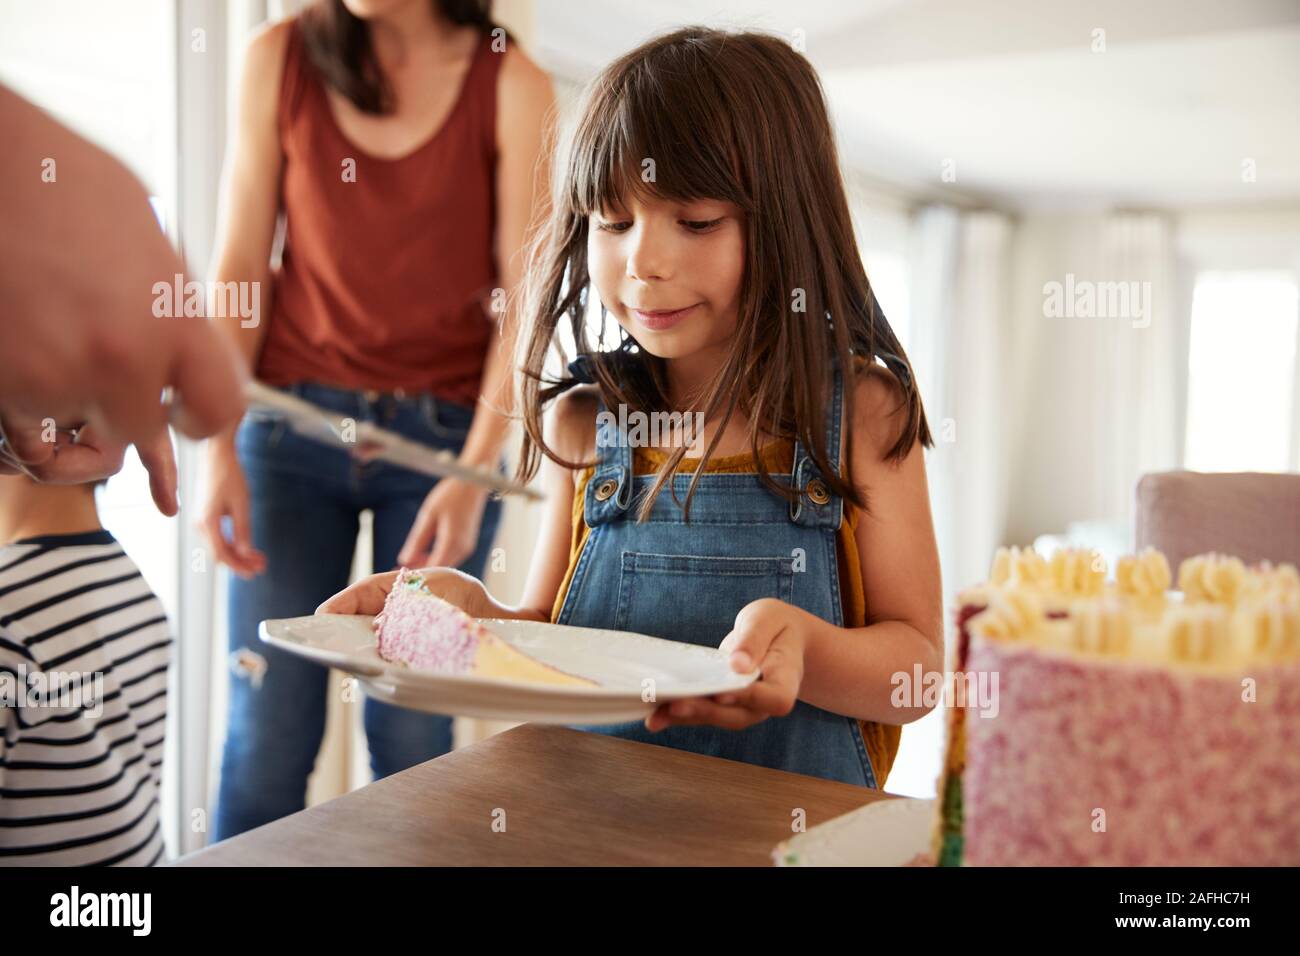 Six year old girl being served  birthday cake during a family celebration, close up Stock Photo